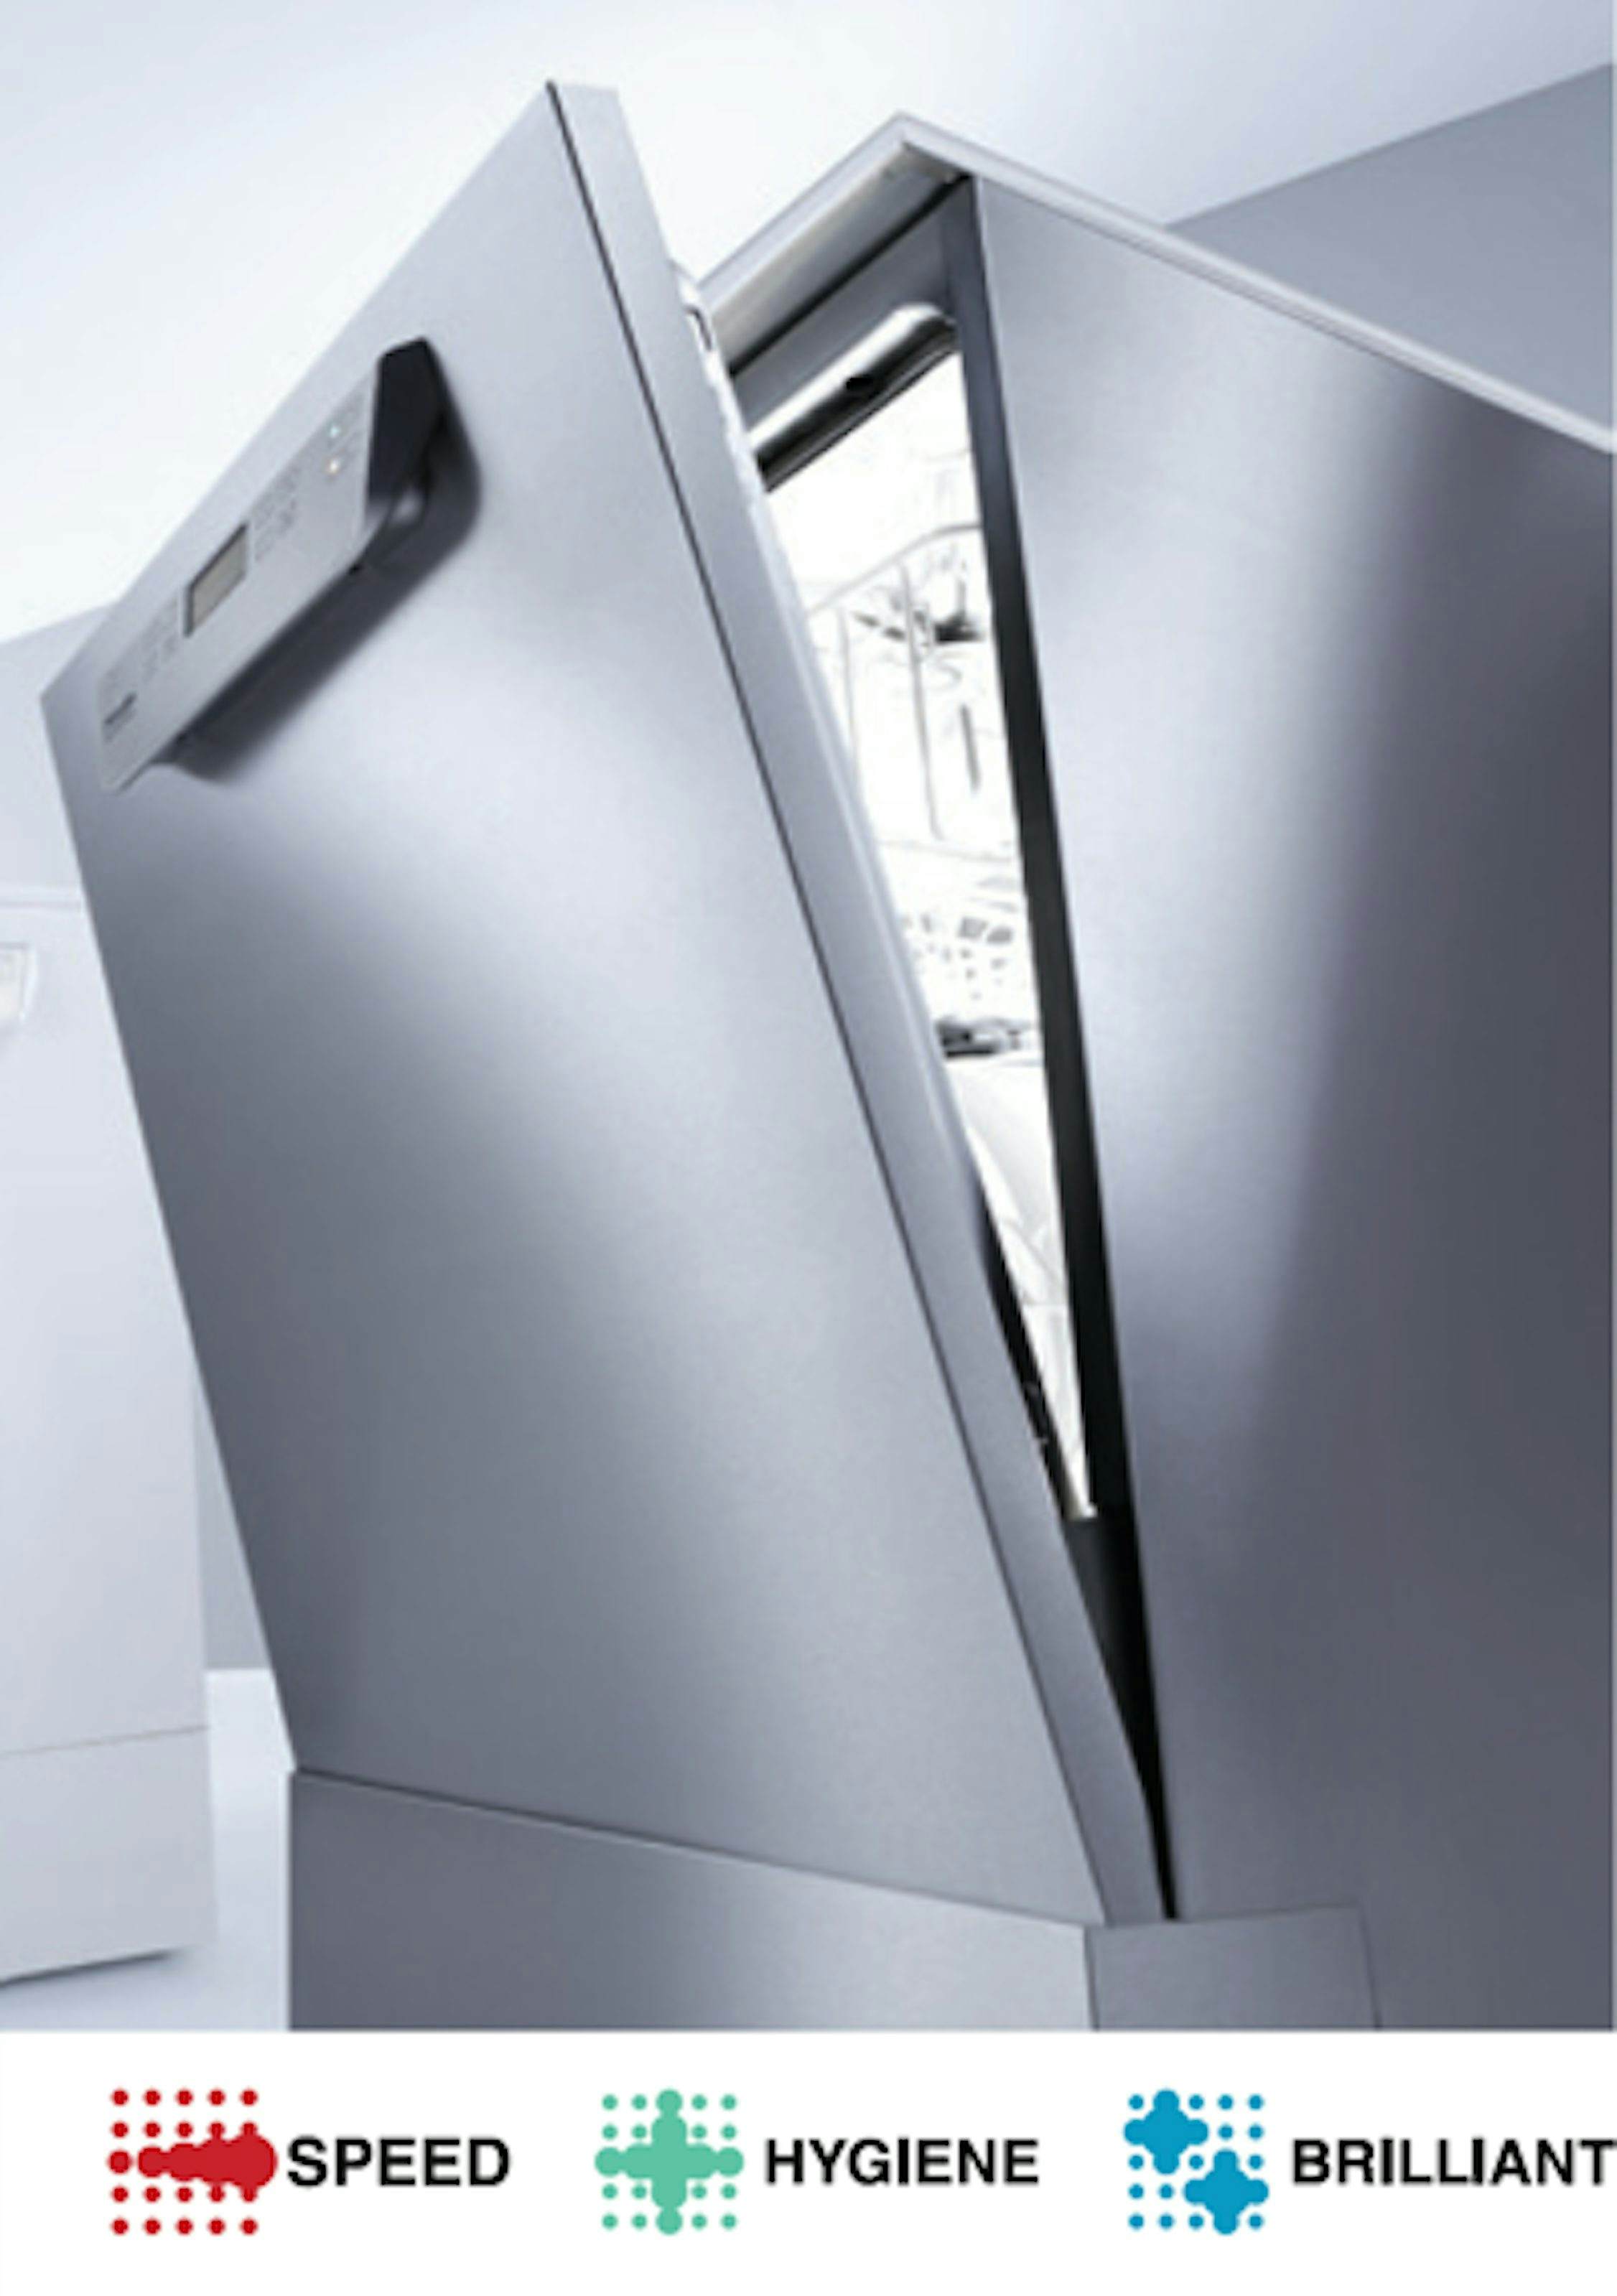 Miele launch their latest range of dishwashers